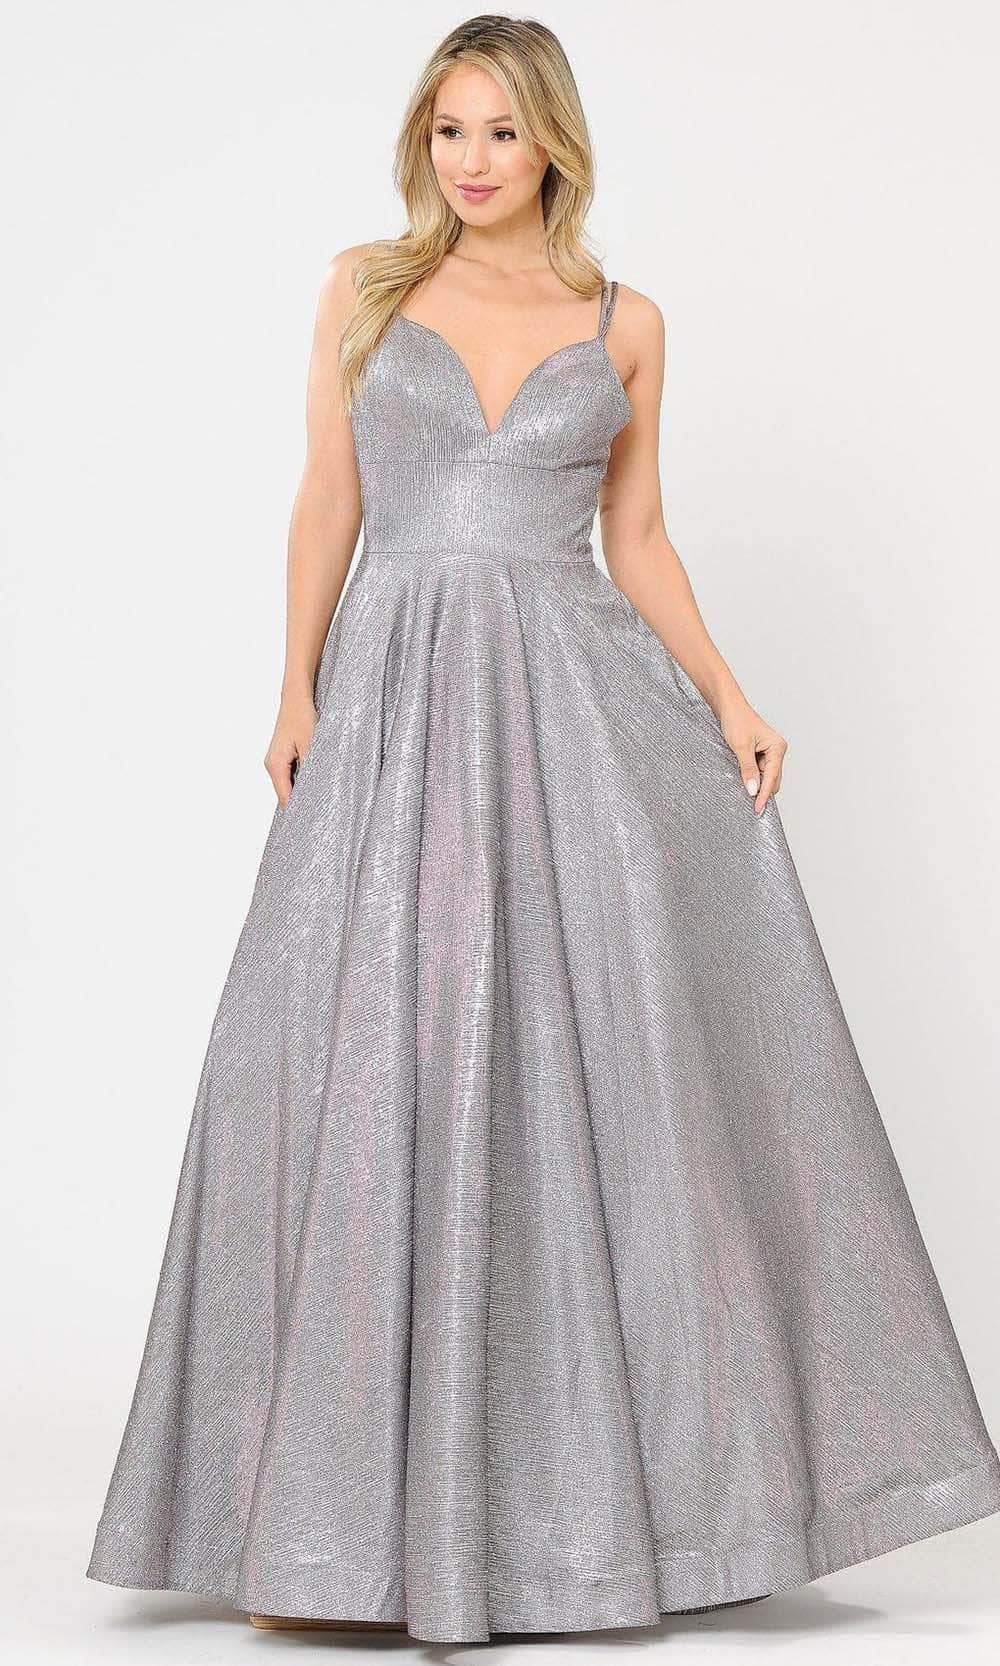 Image of Poly USA 8714 - Sweetheart Glitter A-Line Prom Dress